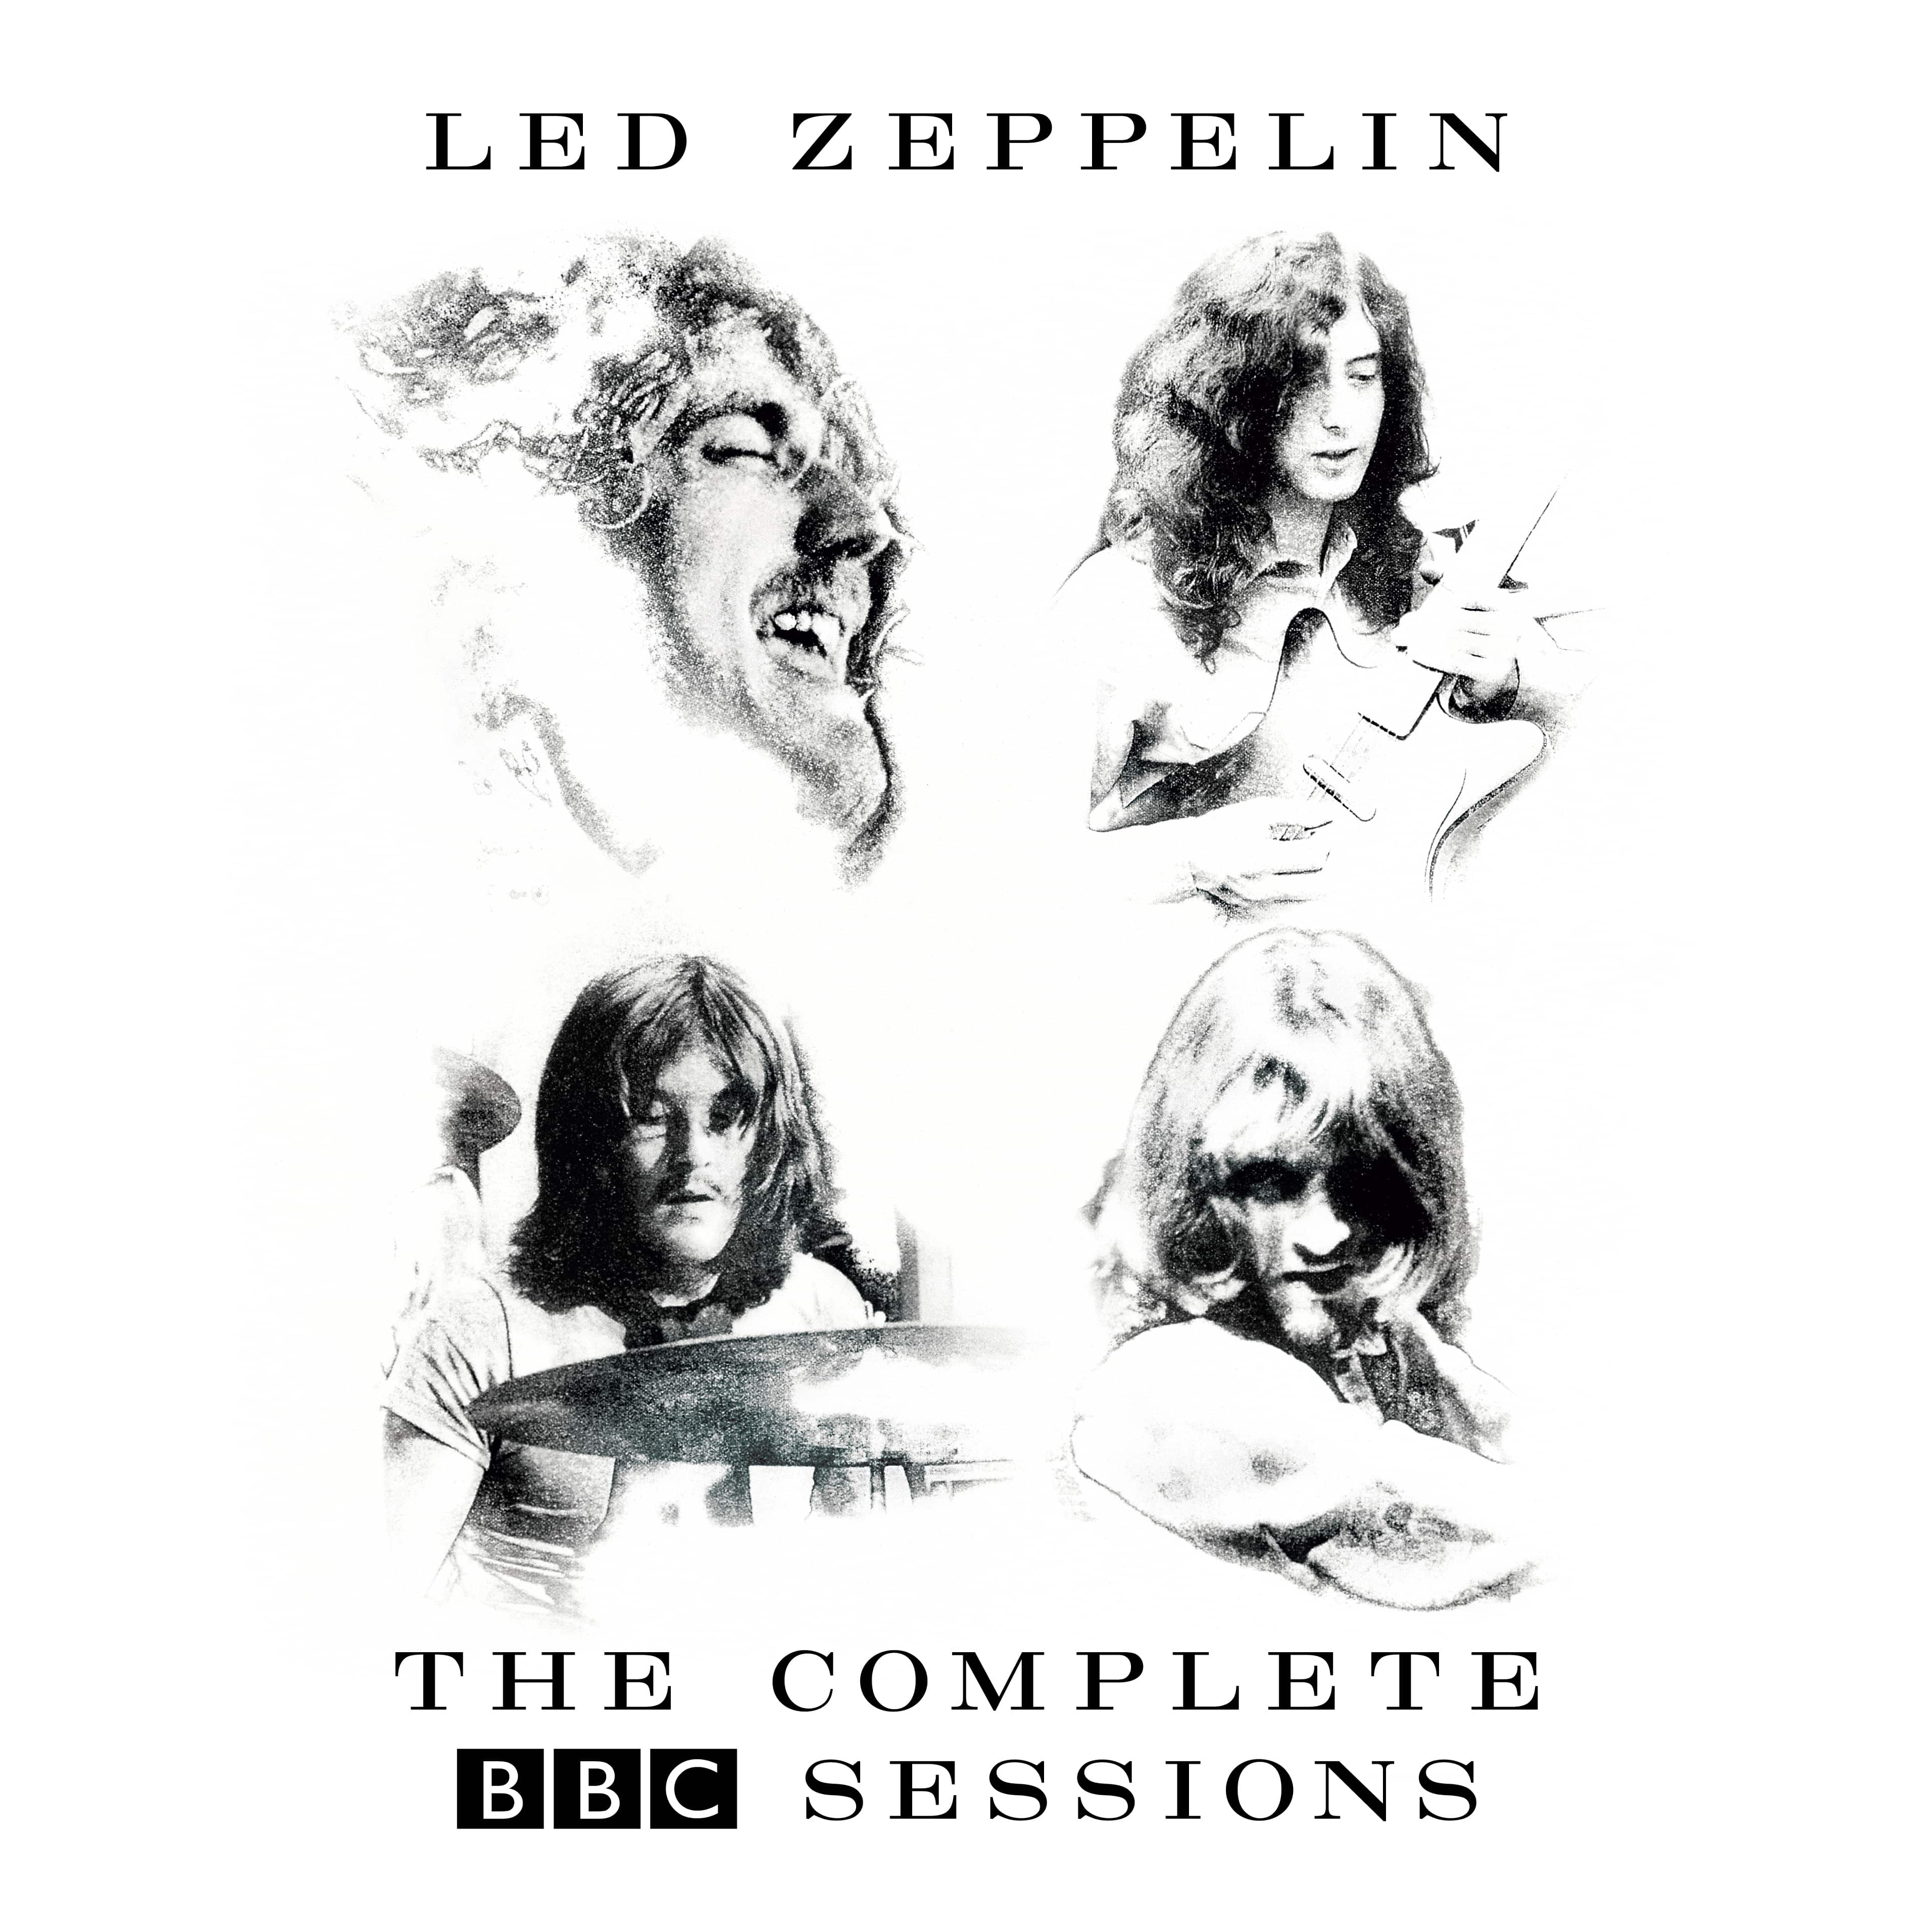 COMPLETE BBC SESSIONS  - digital